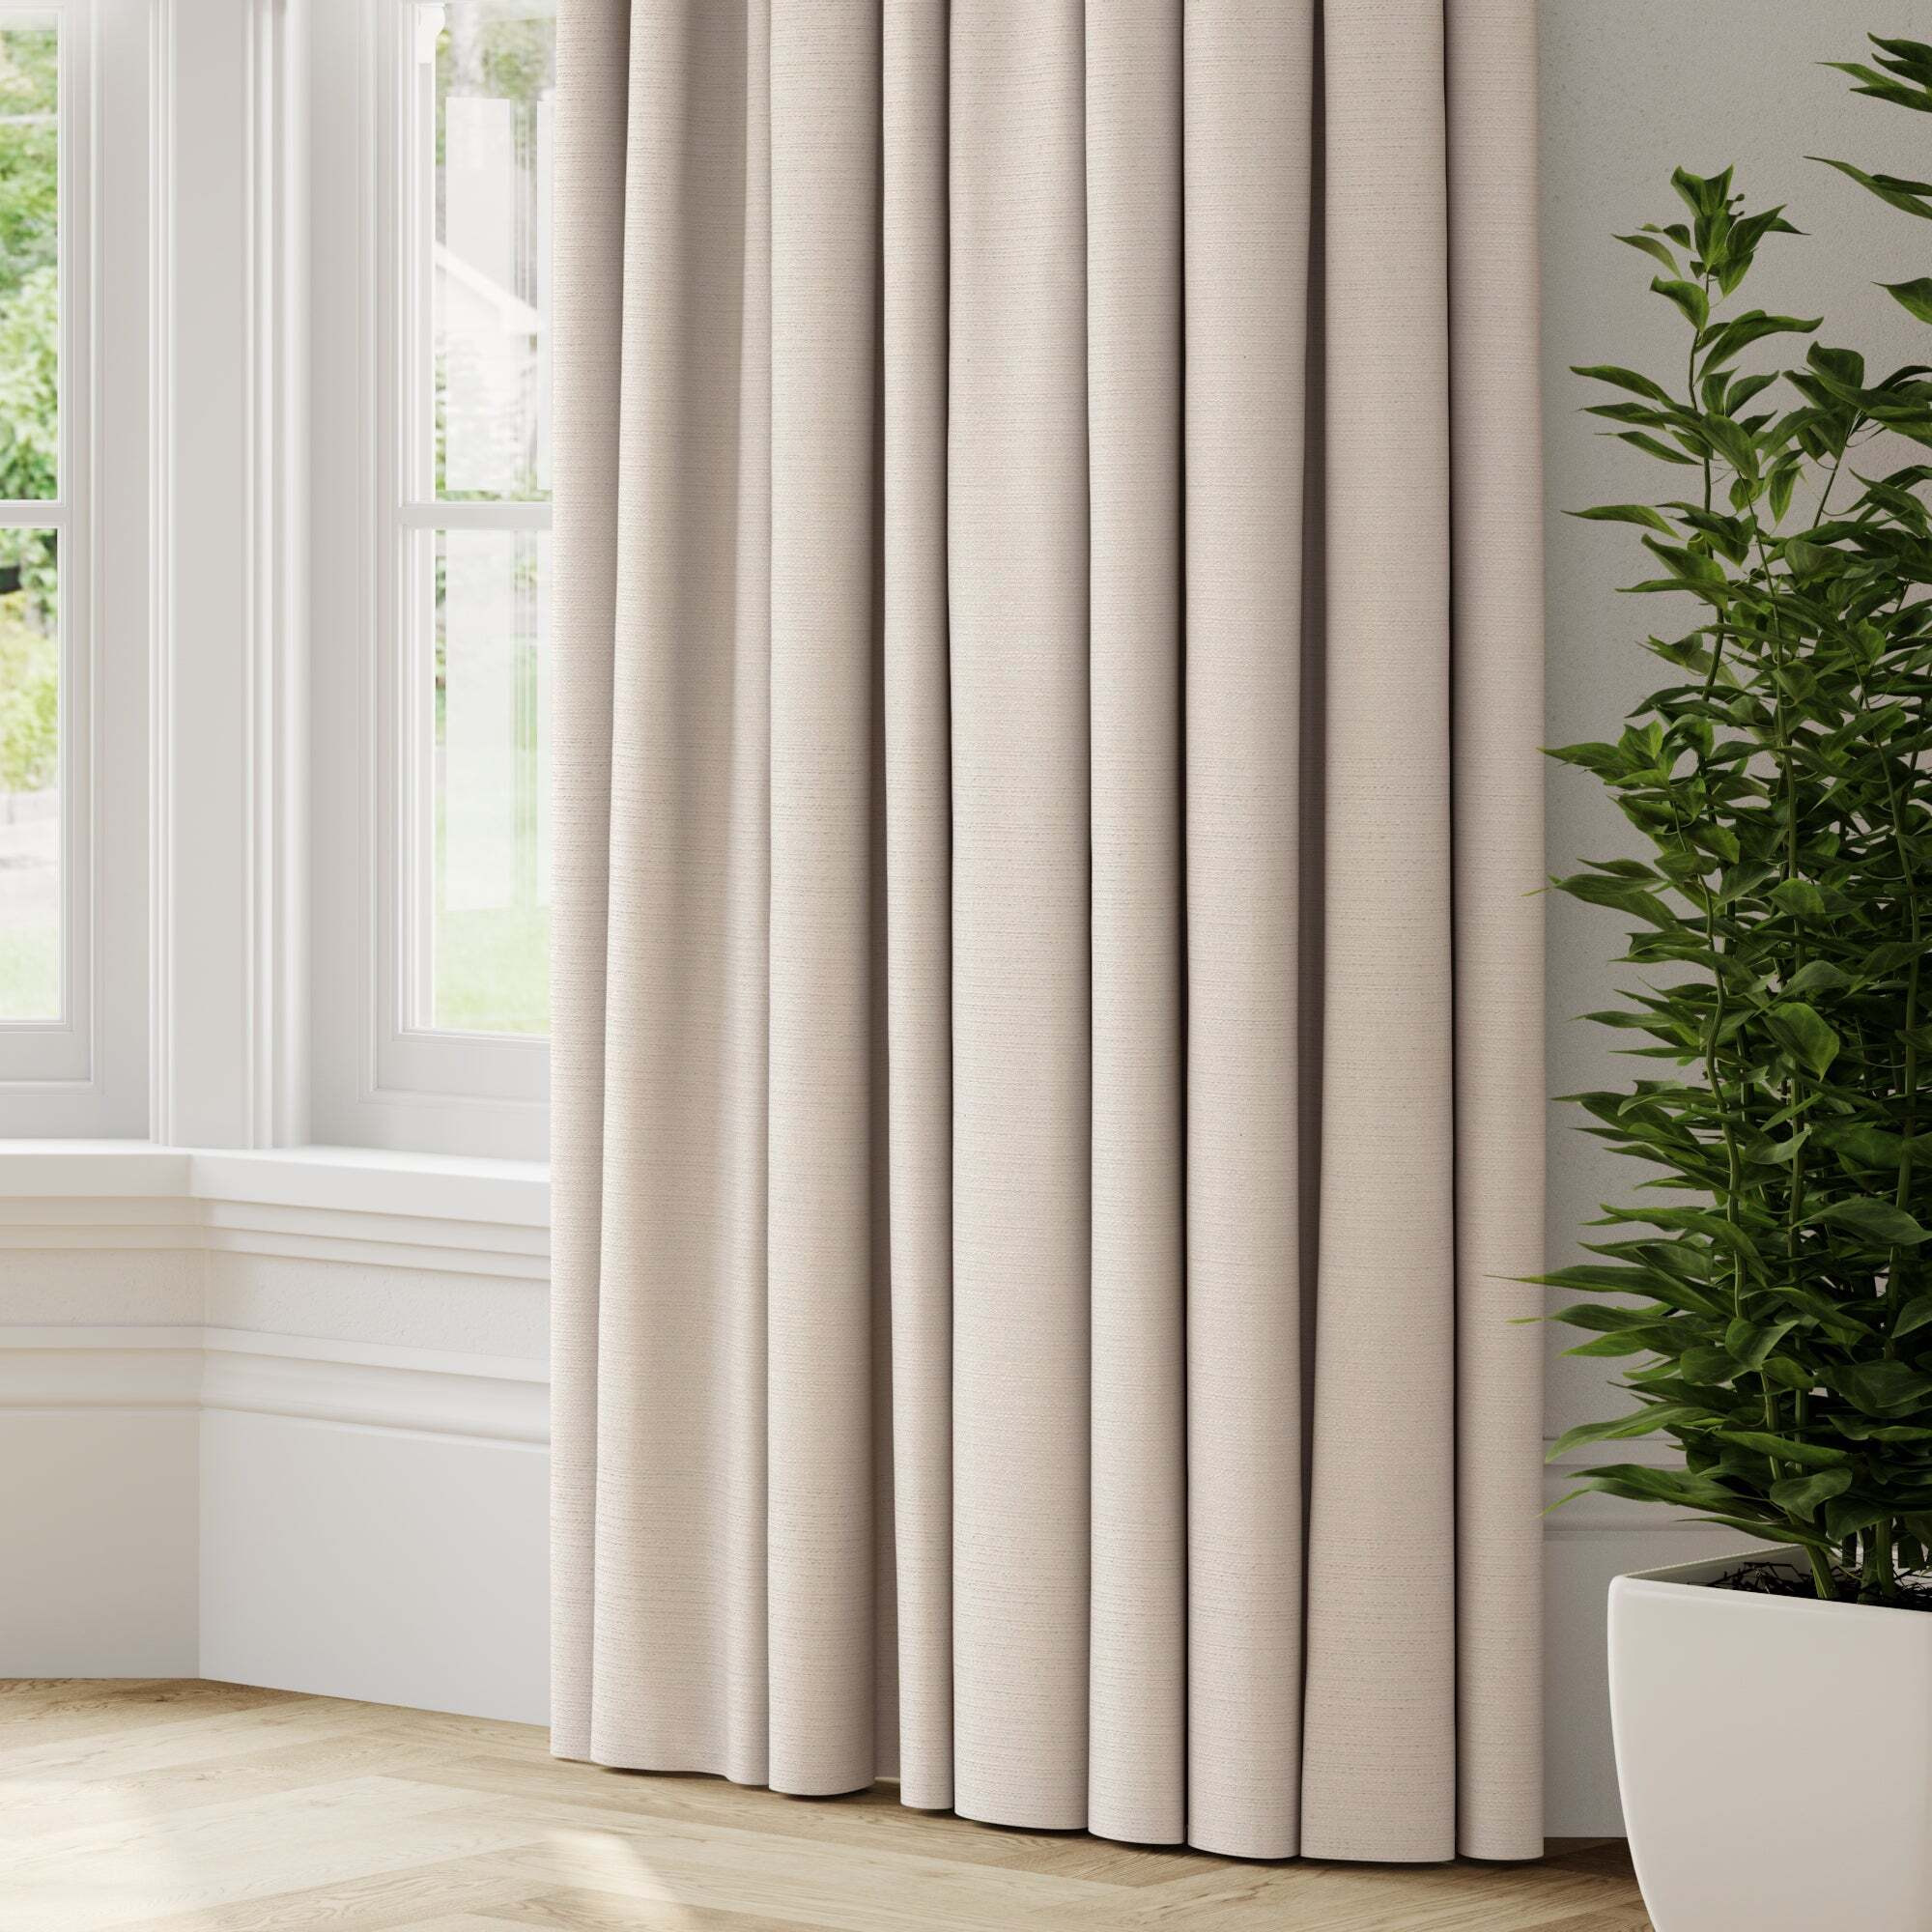 Harper Made to Measure Curtains Harper Oyster